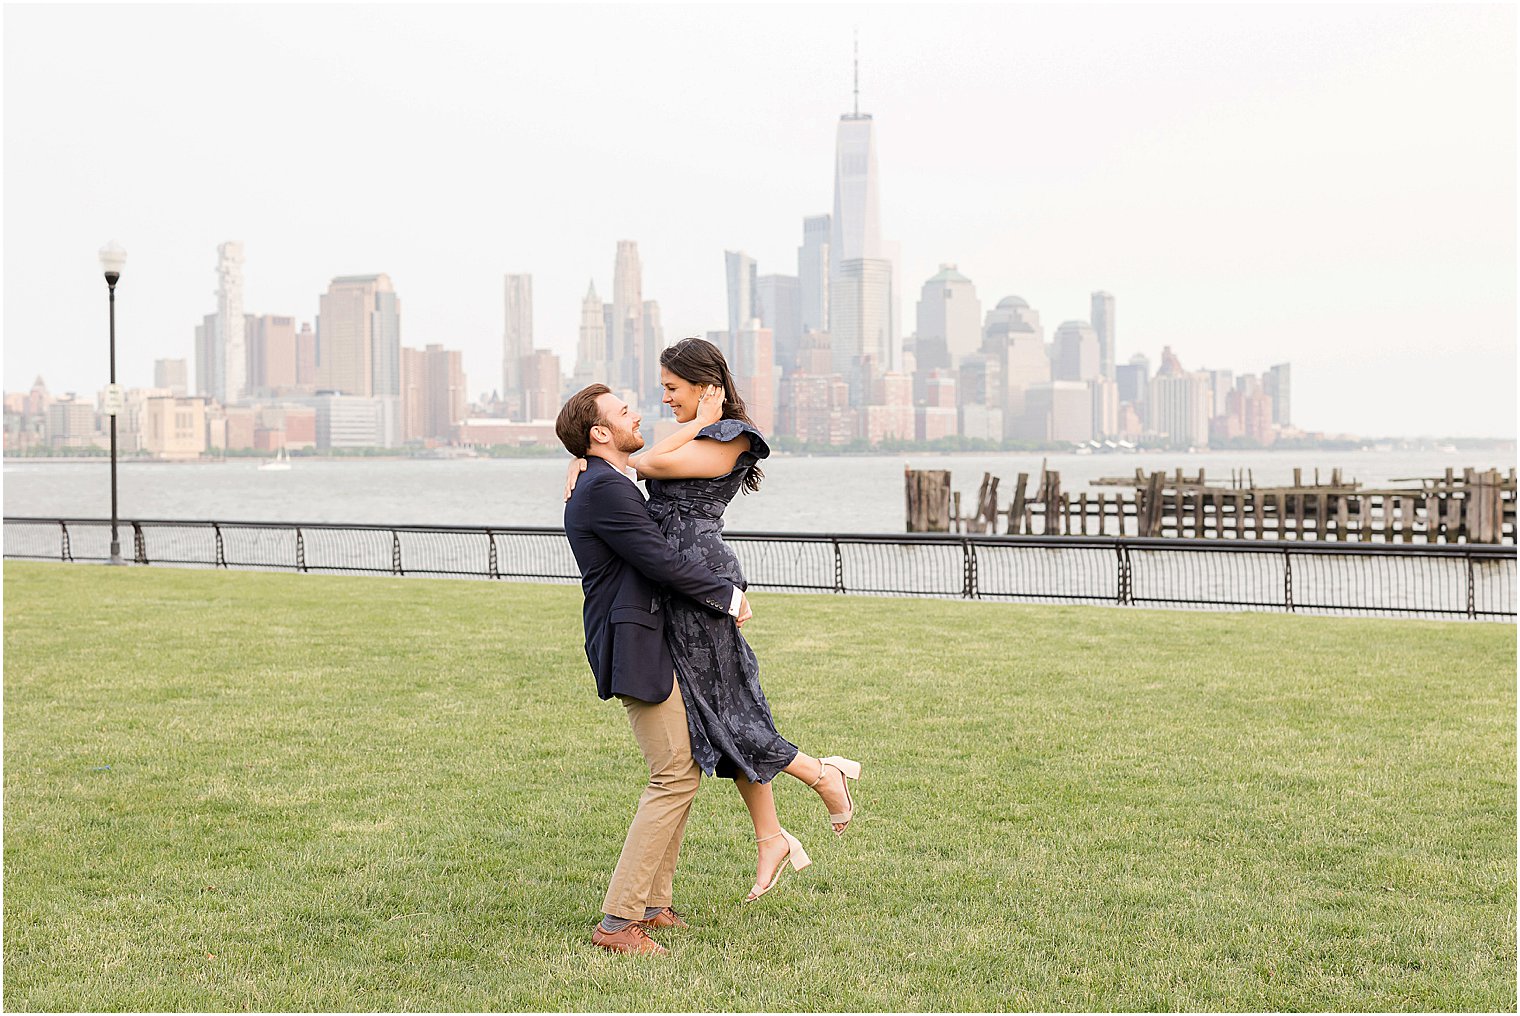 woman lifts man off ground in park during Hoboken engagement session